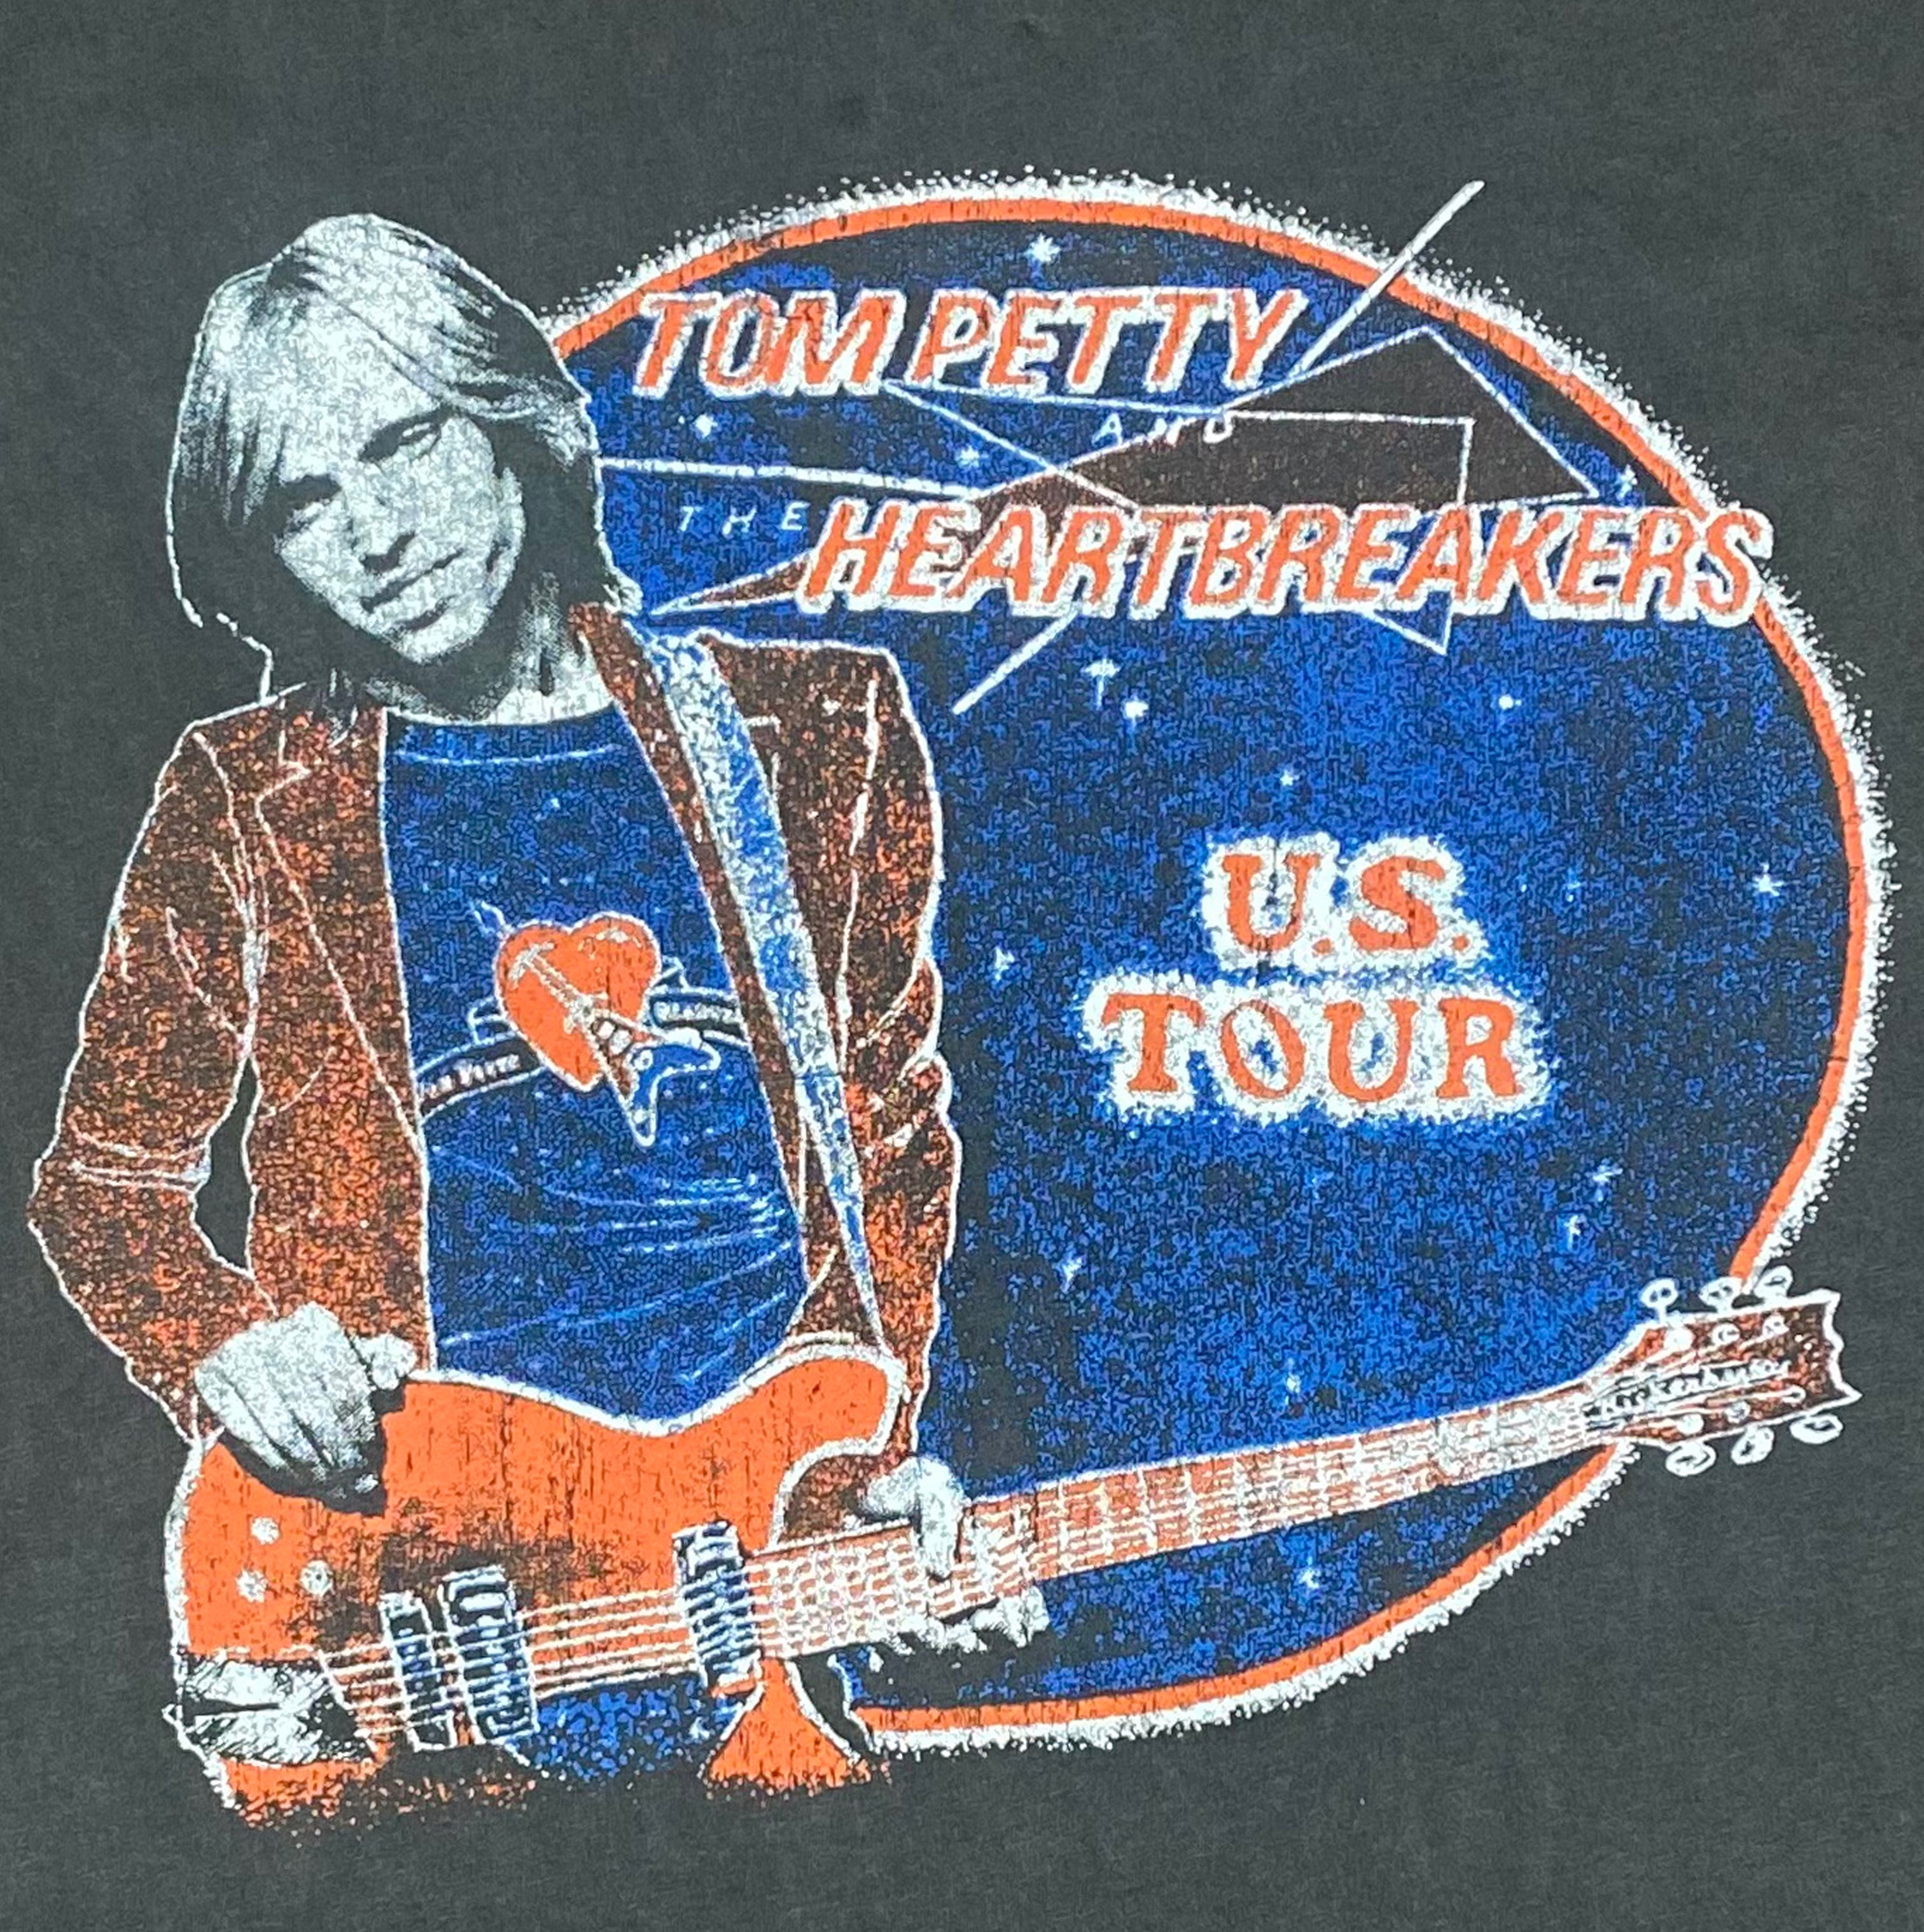 Tom Petty and the Heartbreakers U.S. Tour